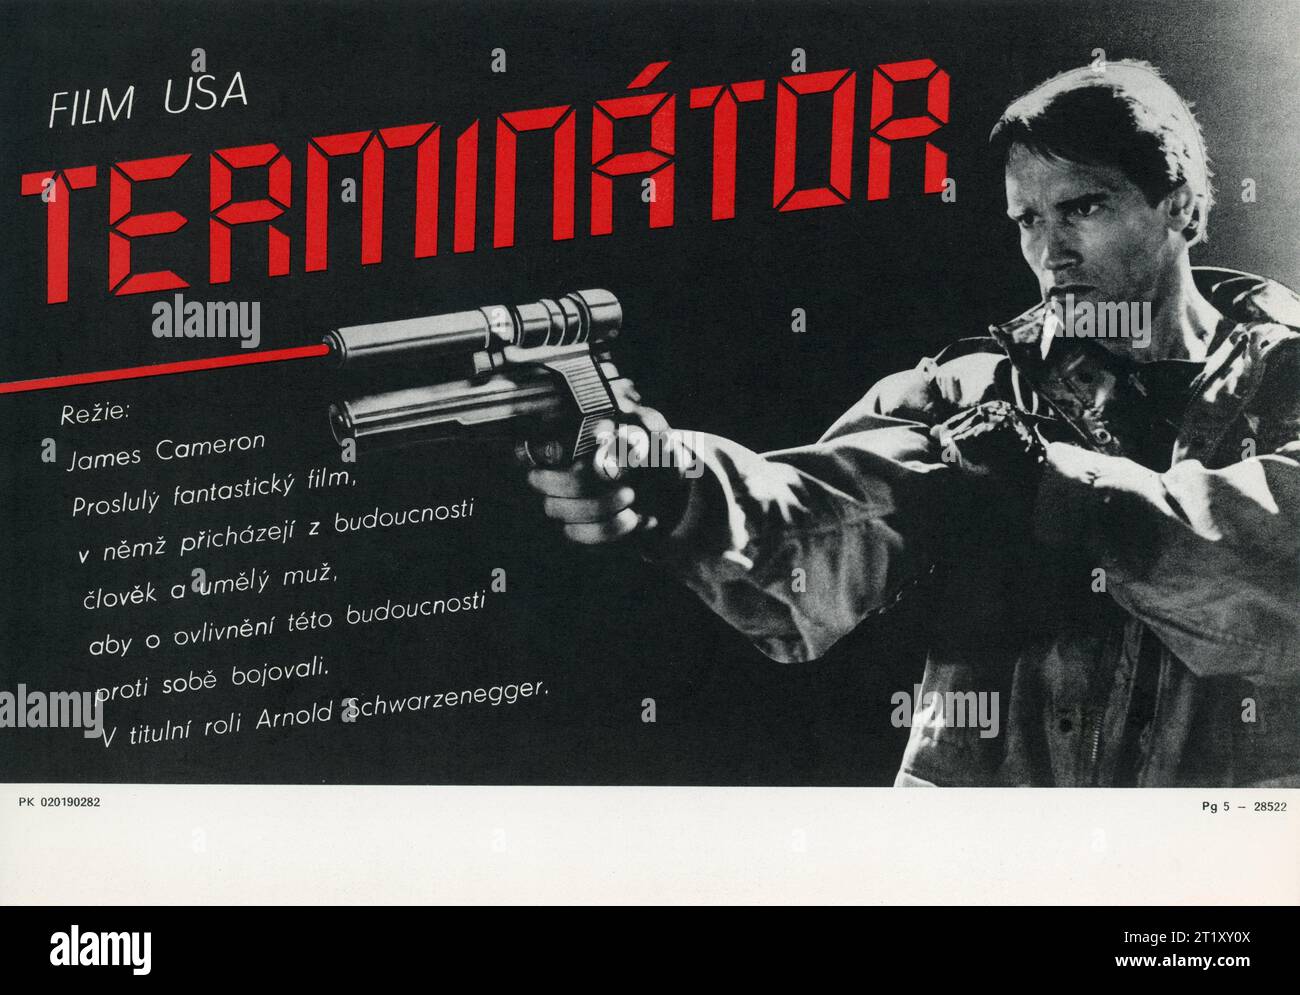 TERMINATOR By James Cameron Cult Movie Poster